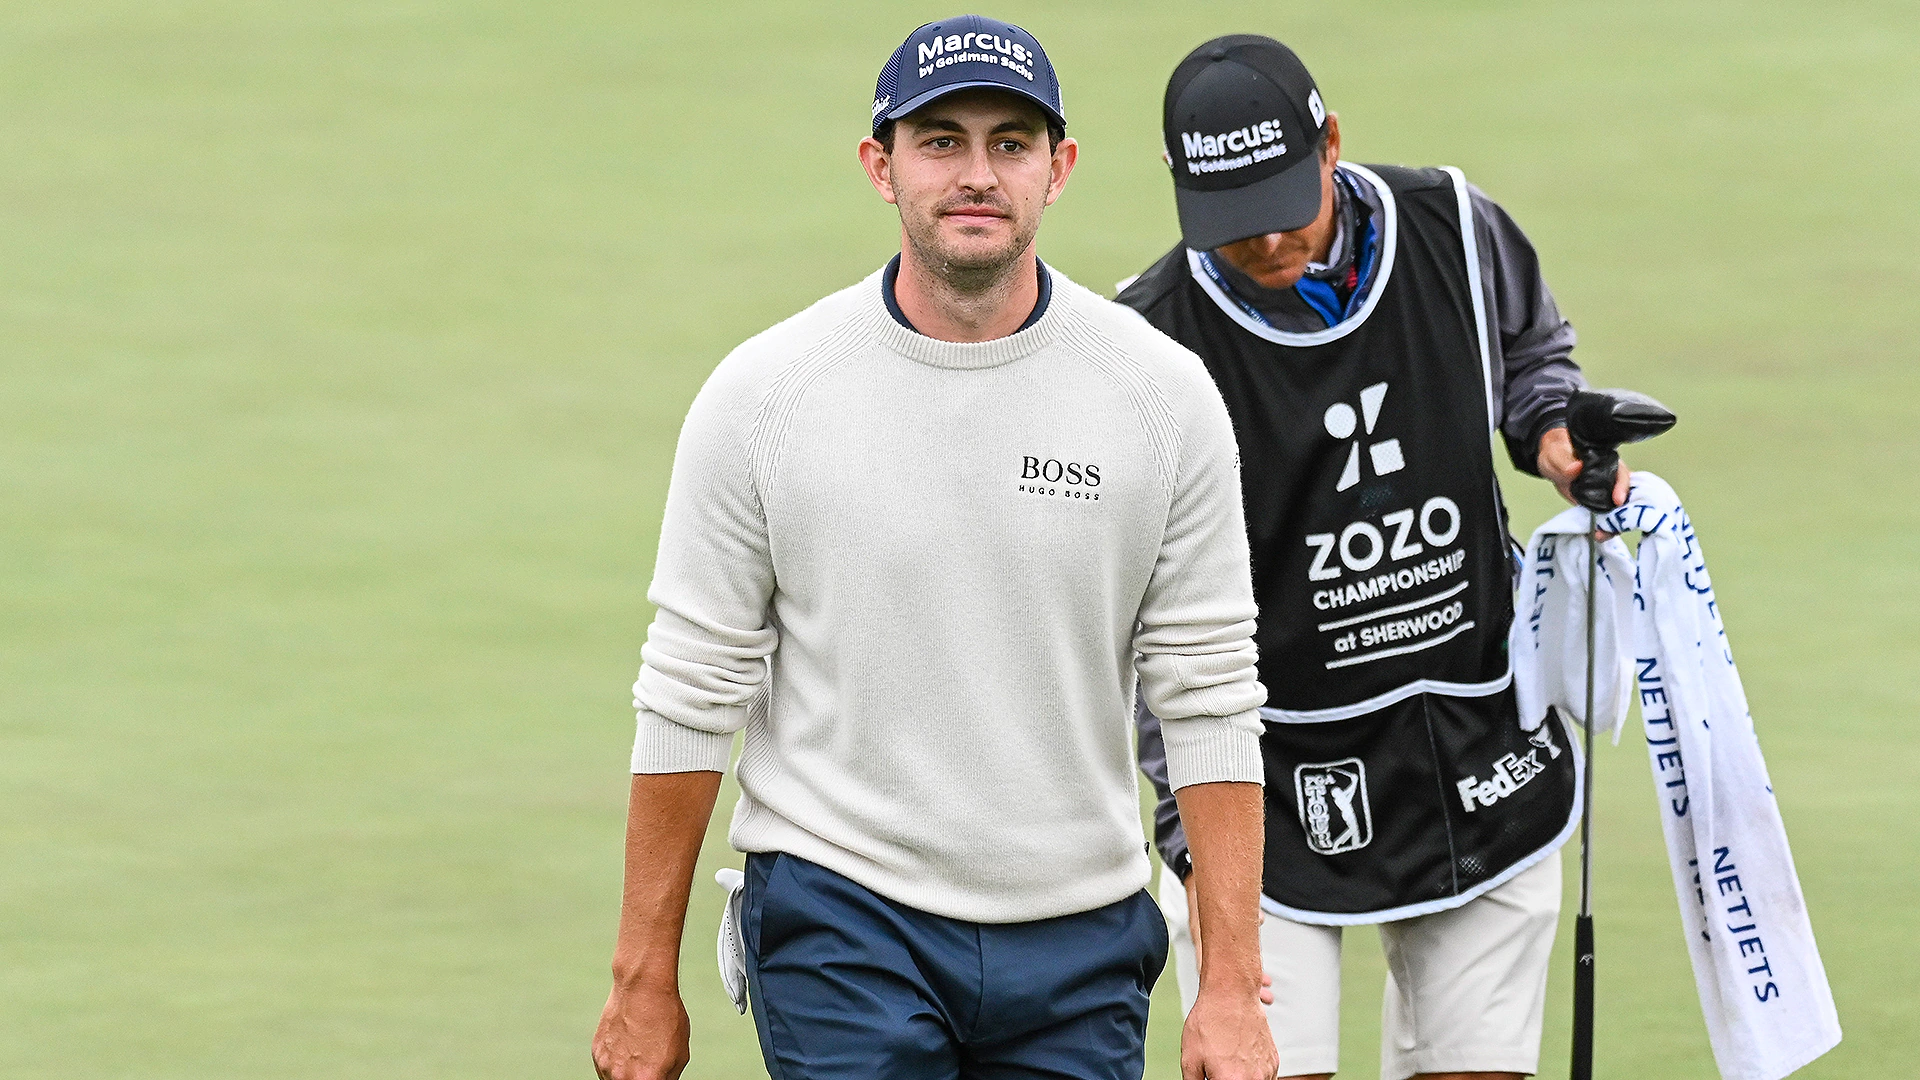 Not quite a home win for Patrick Cantlay but a sweet one at Zozo Championship 2